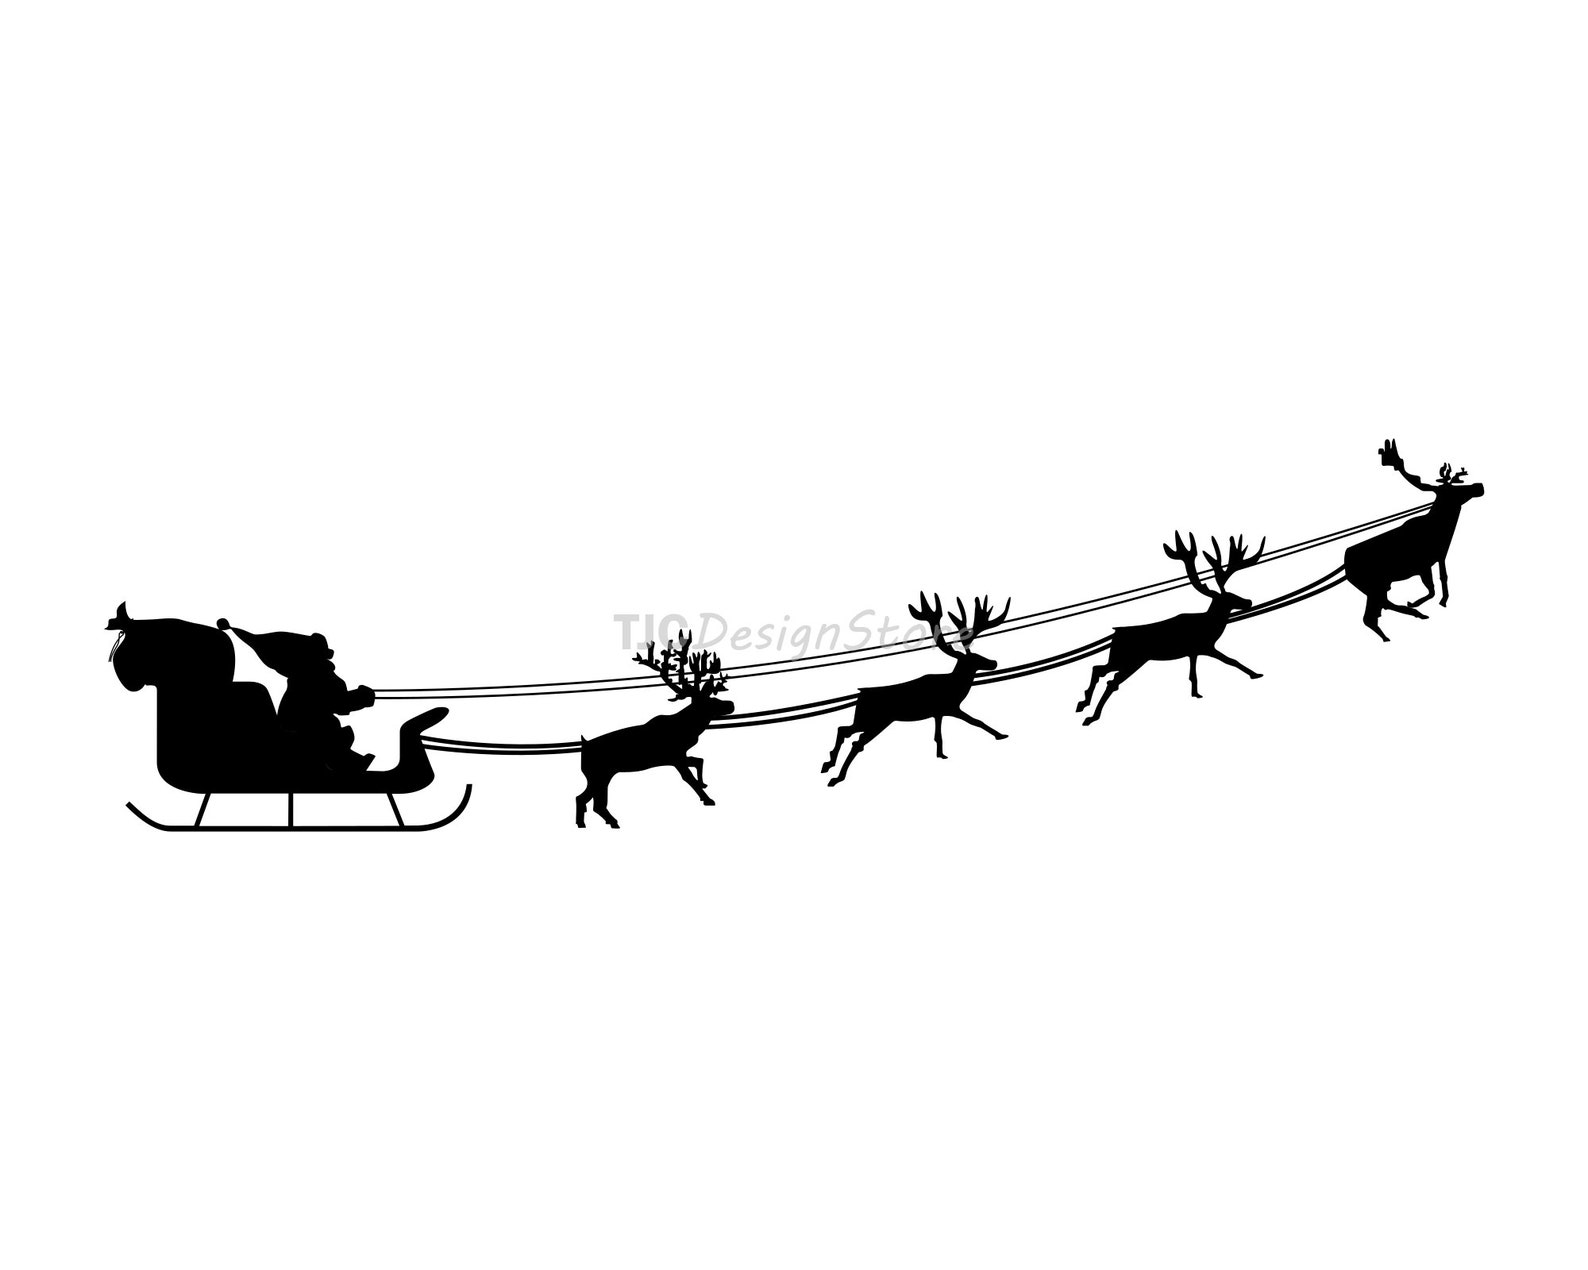 Santa Sleigh and Reindeers, SVG Image, DXF, PNG, Christmas, Instant ...